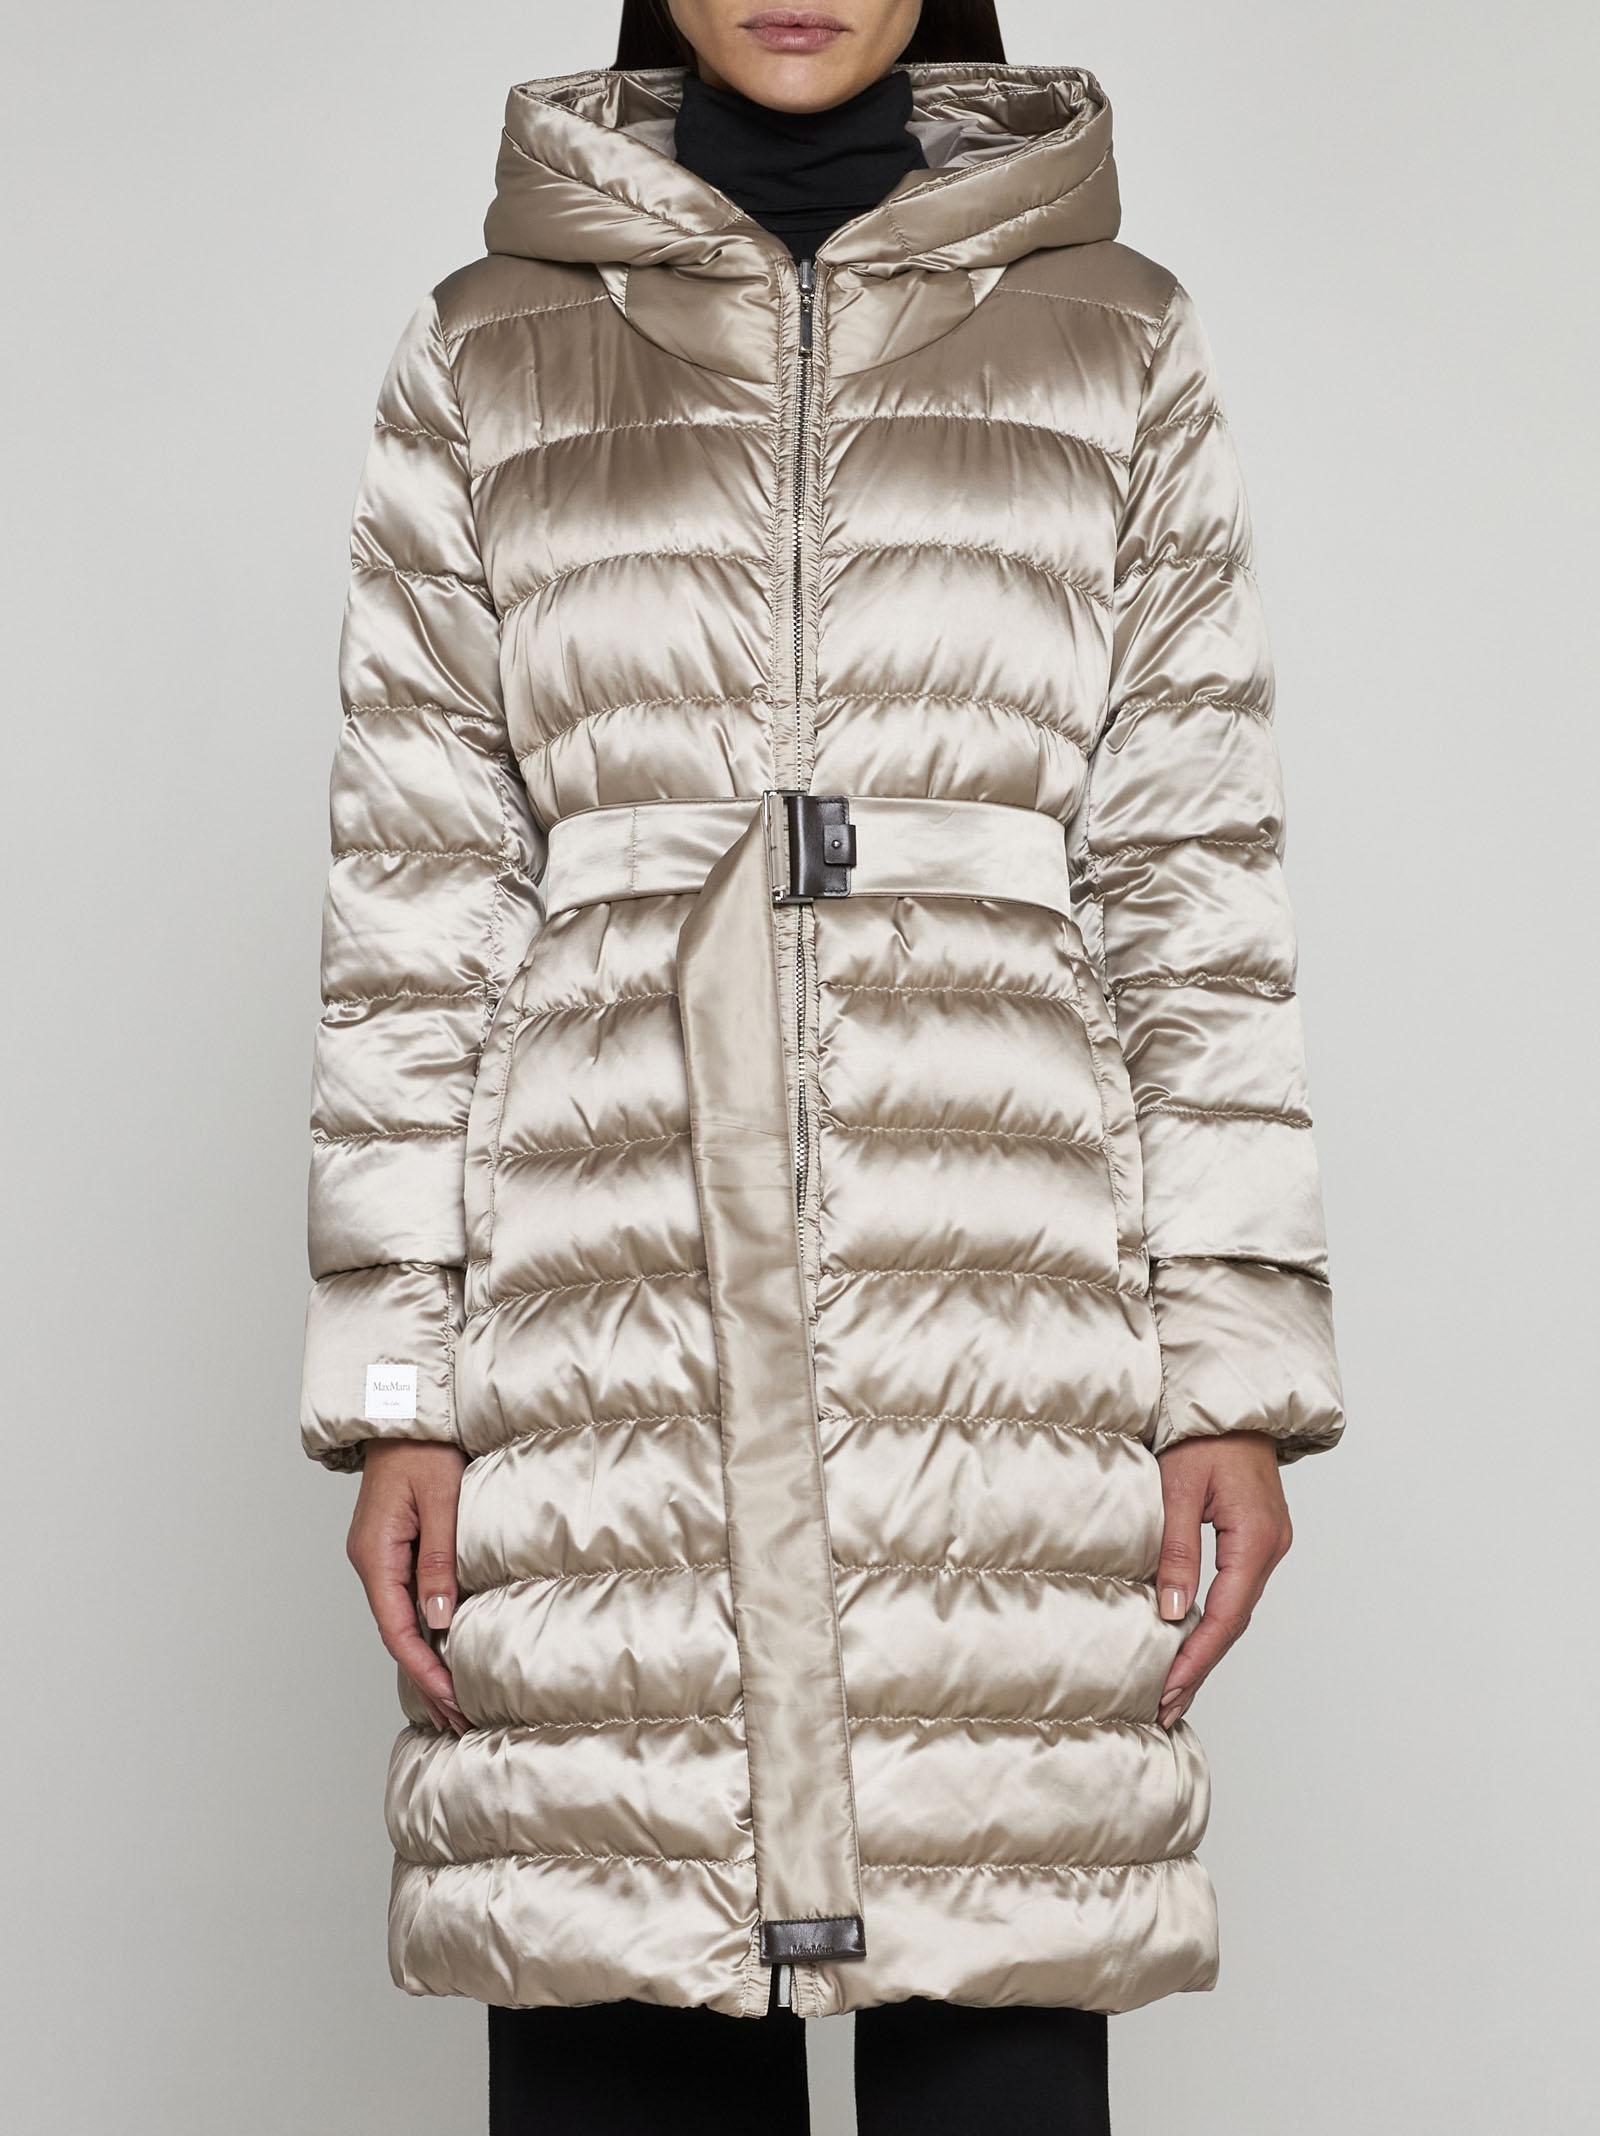 Max Mara The Cube Novepi Quilted Nylon Down Jacket in Natural | Lyst